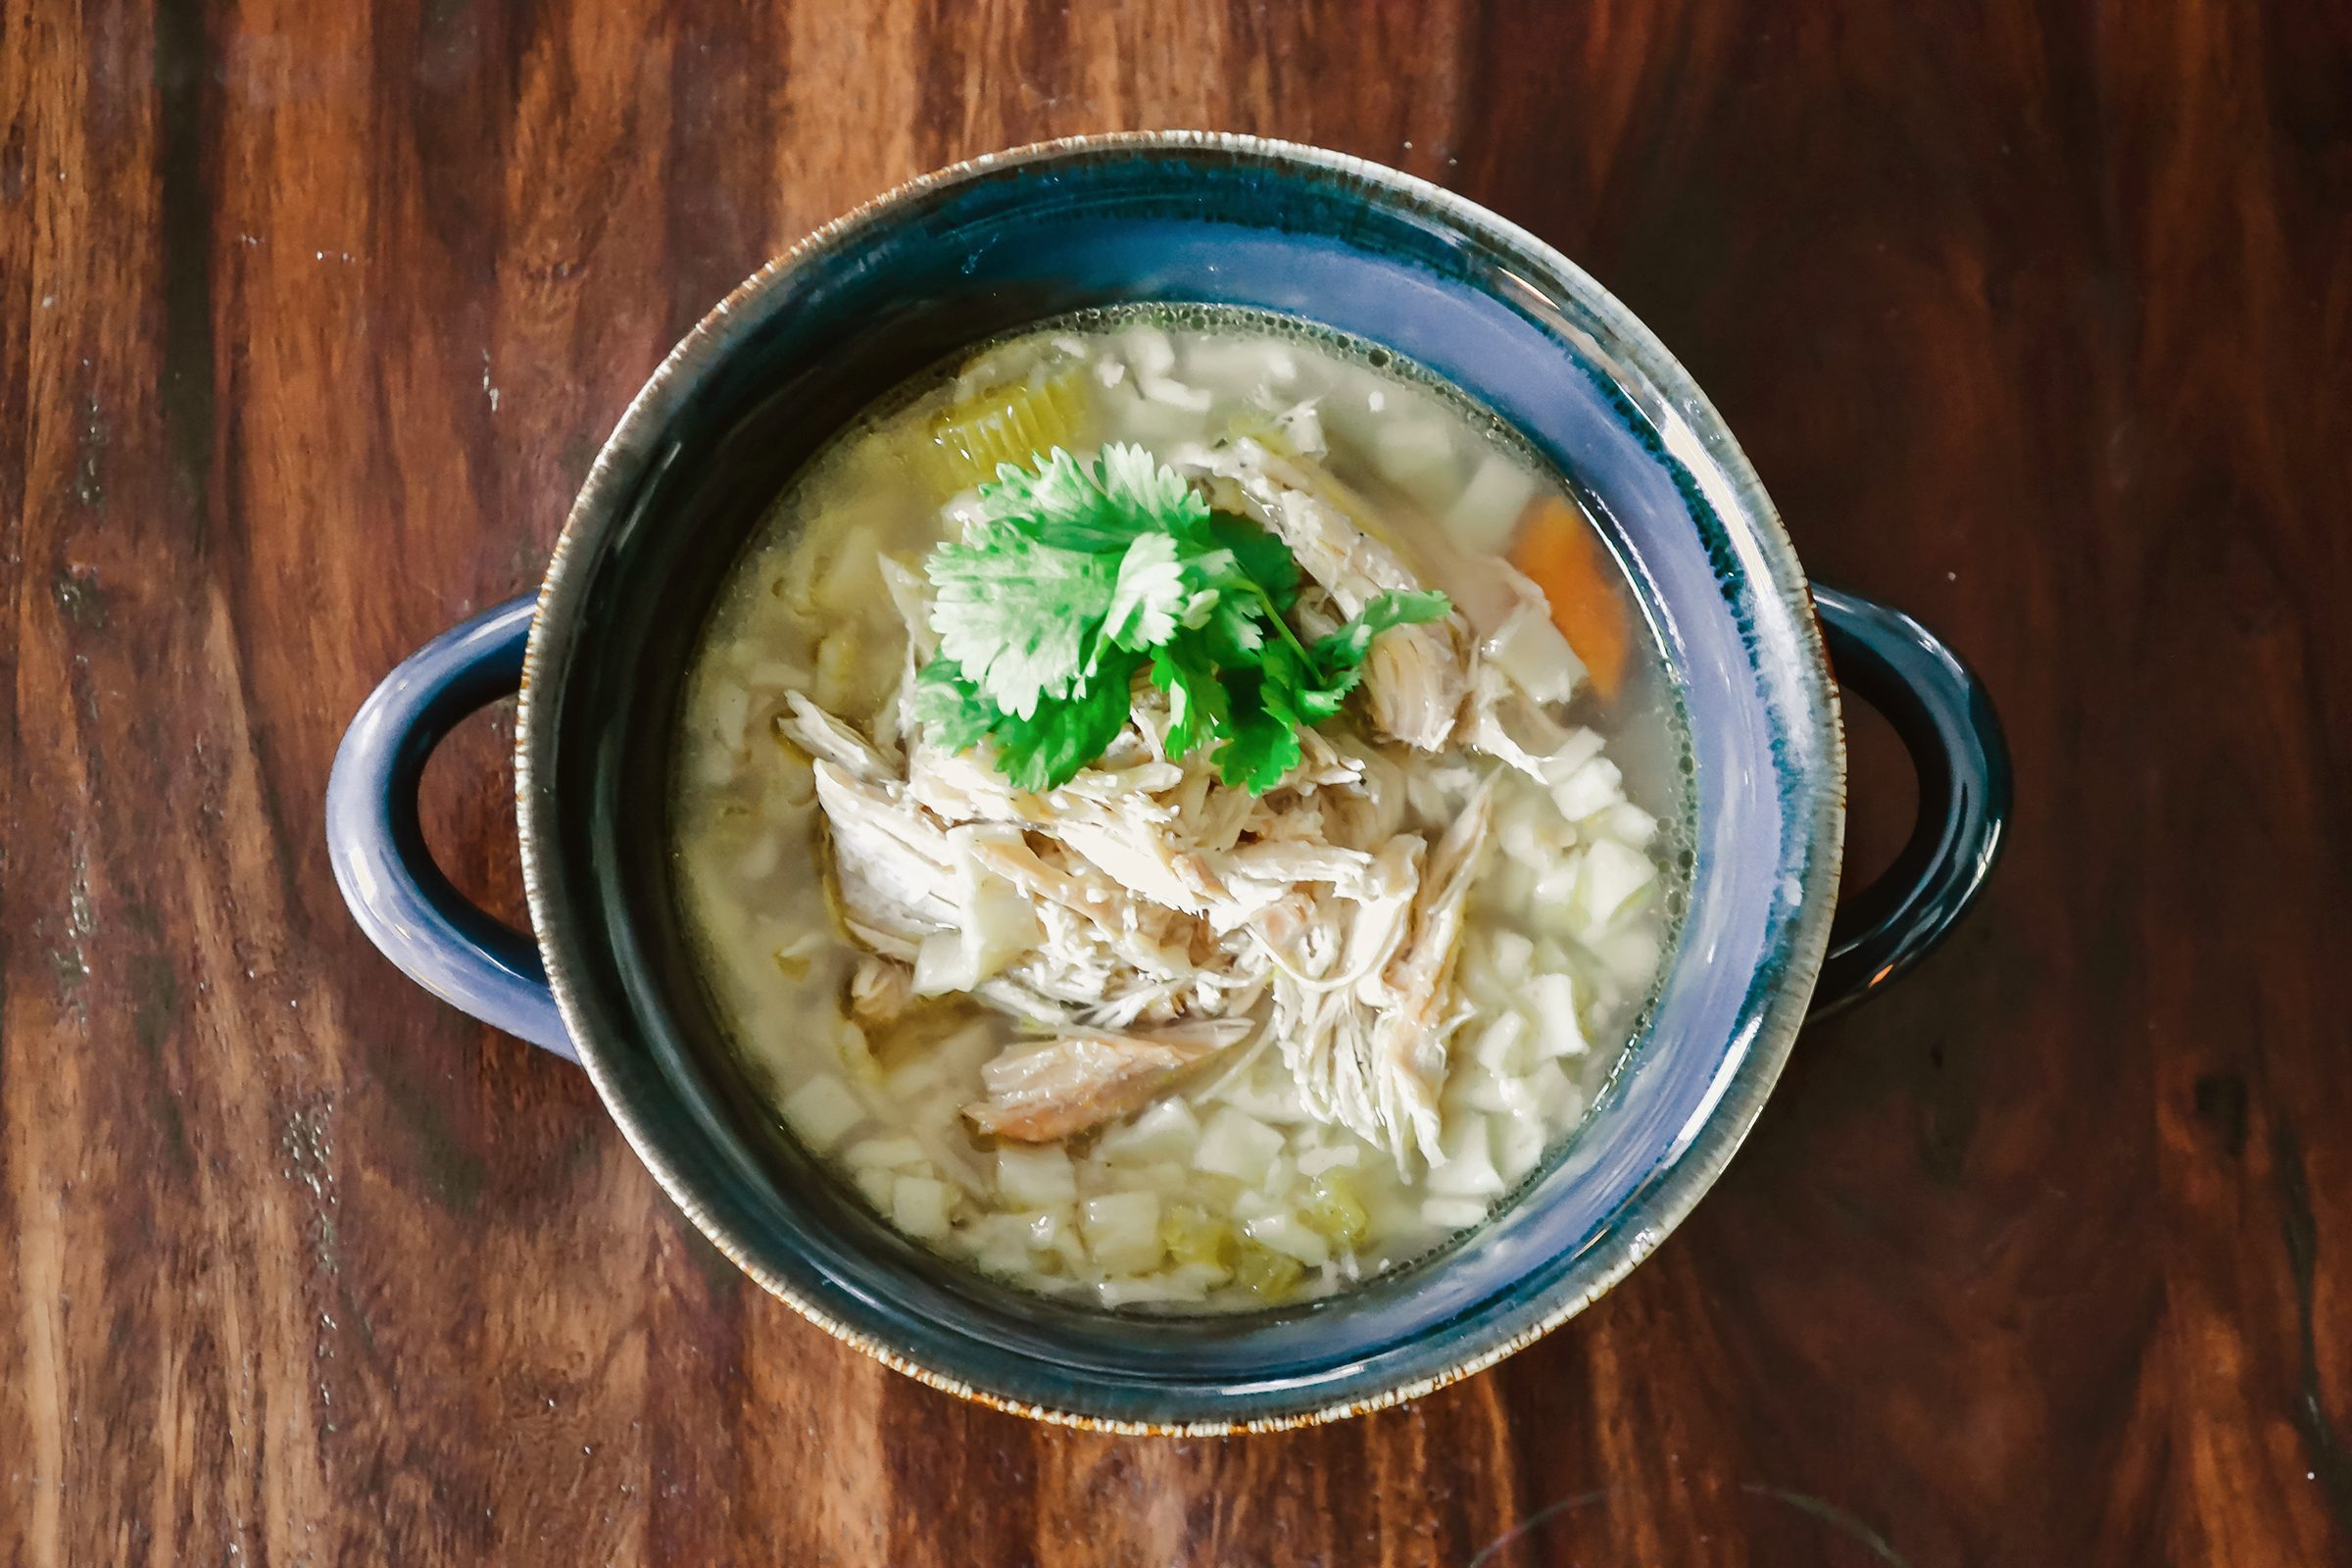 Instant Pot Chicken and Rice Soup - The Oregon Dietitian